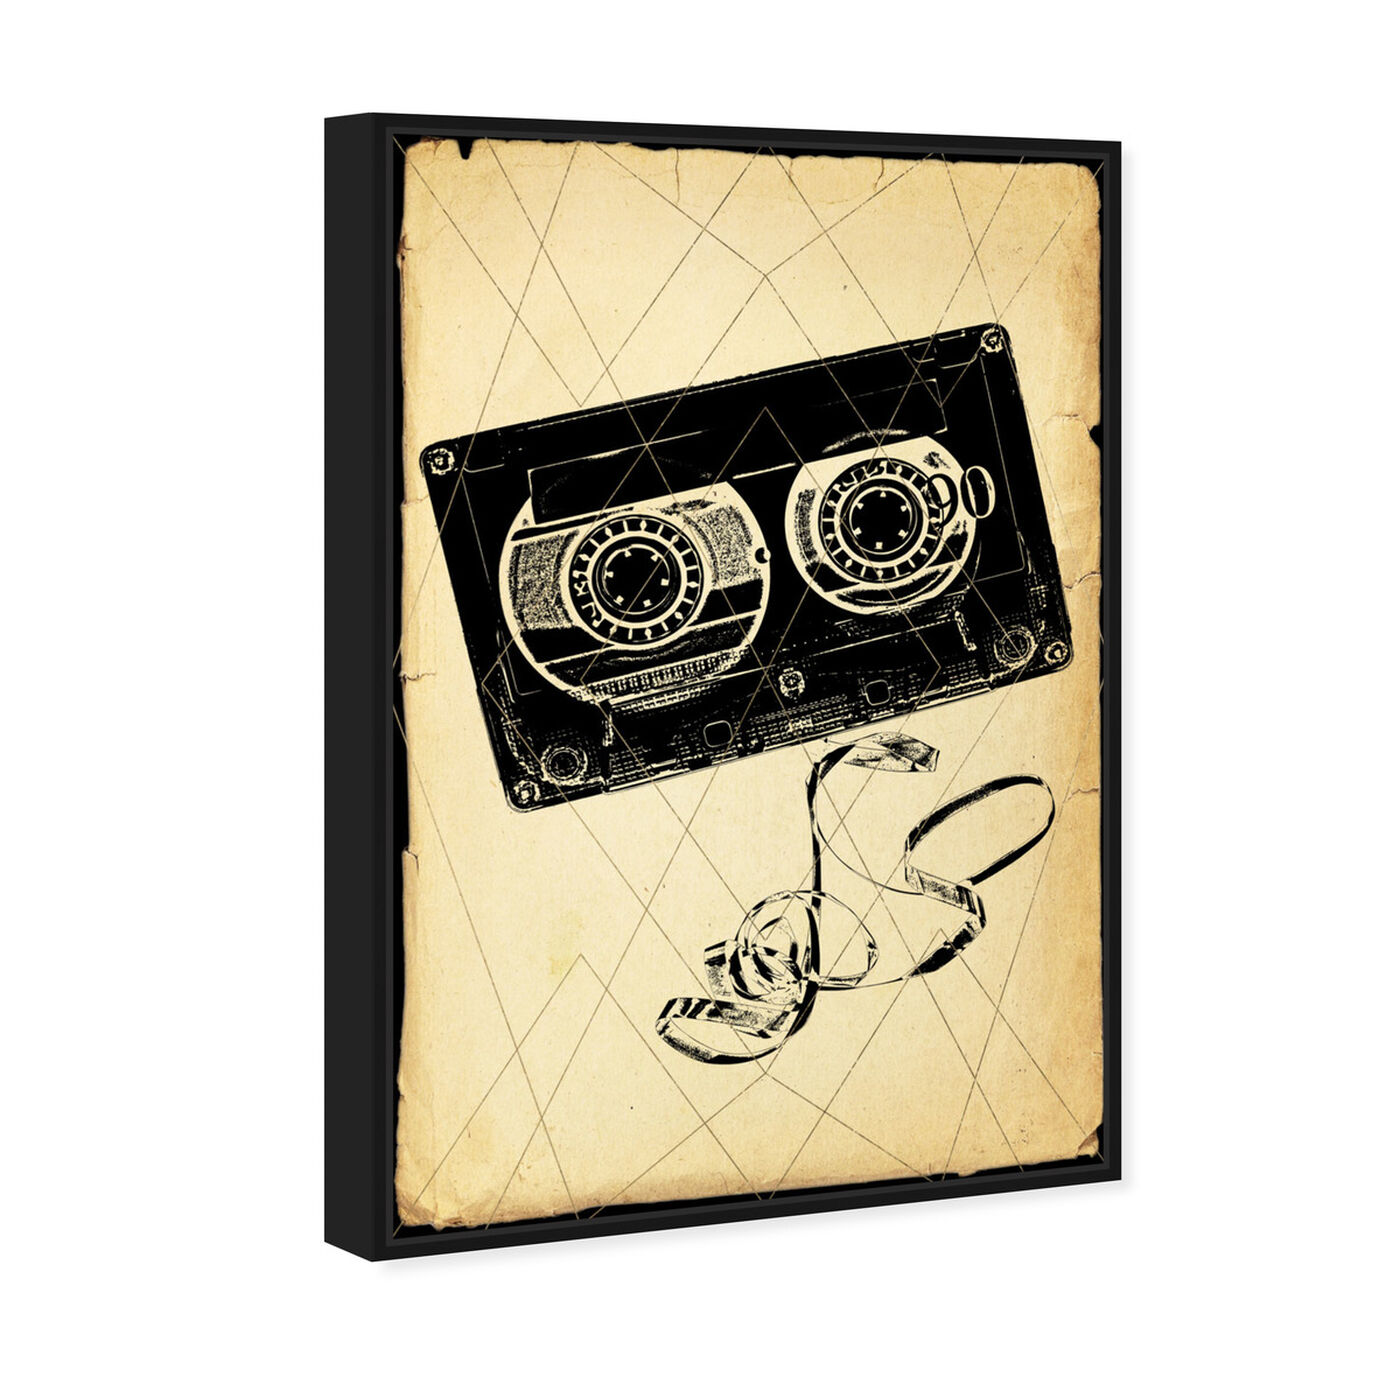 Angled view of Cassette Tape Print featuring music and dance and dj art.